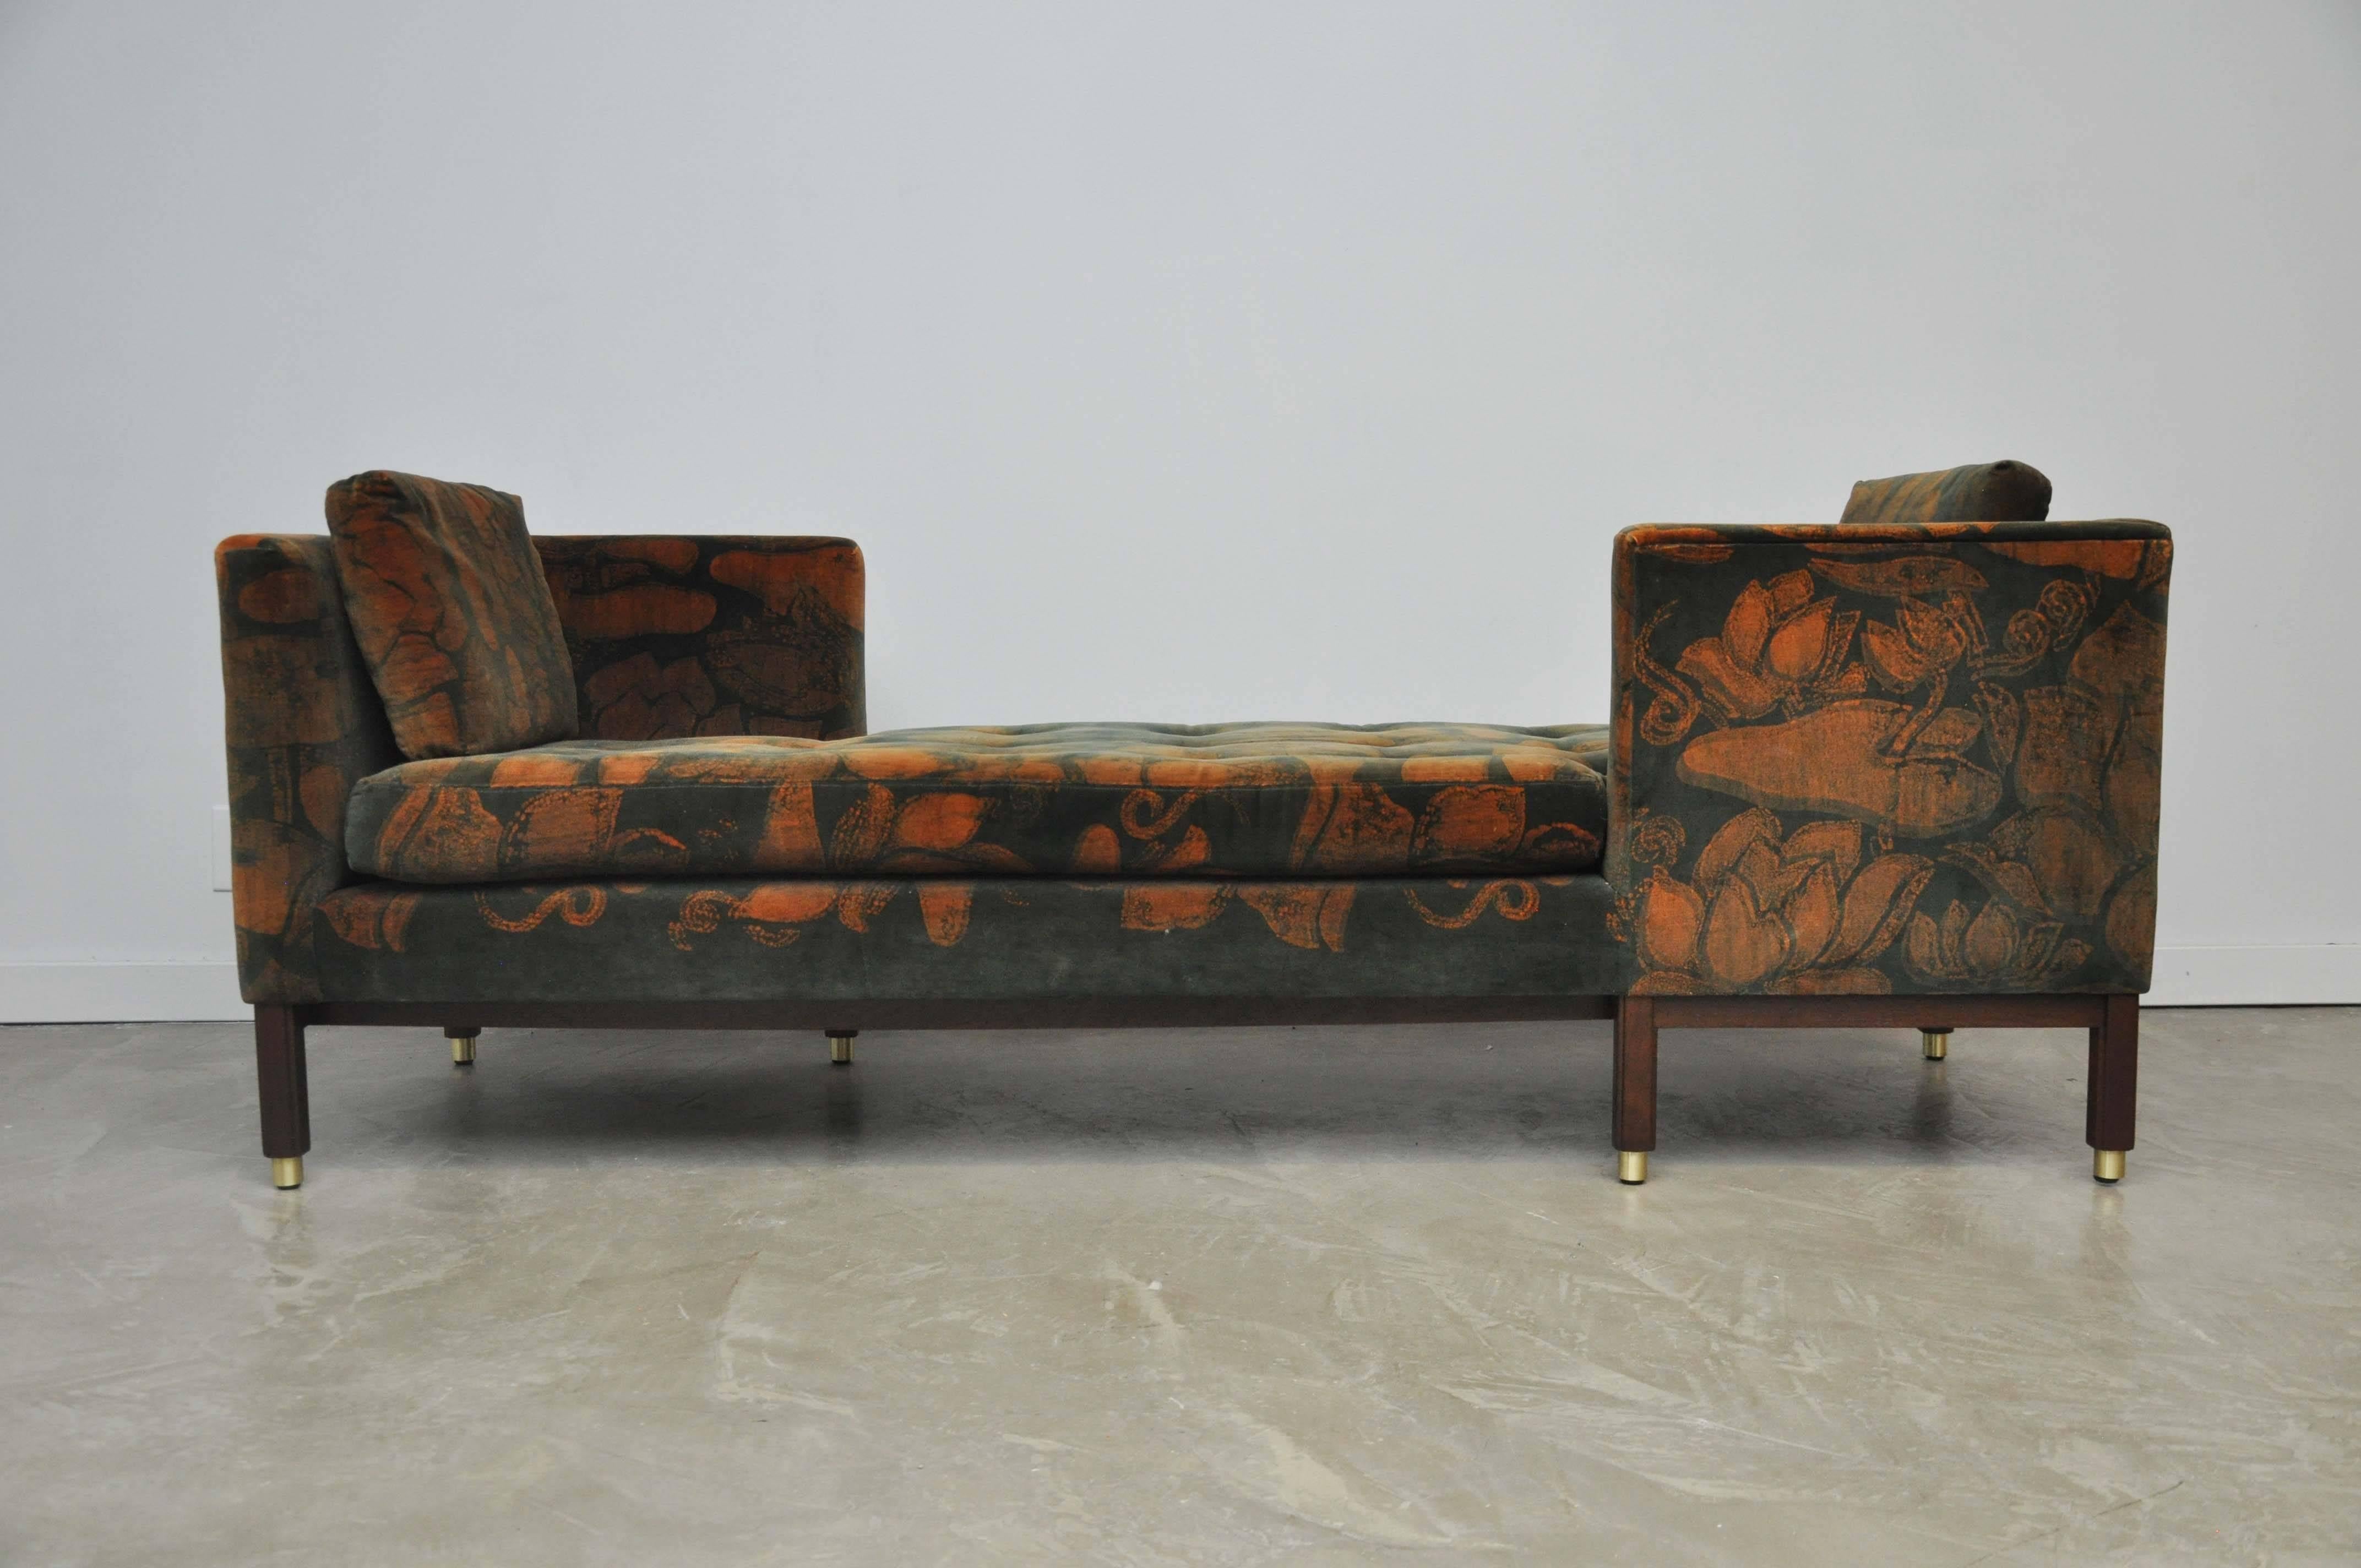 Pair of Dunbar Tete-a-tete sofas by Edward Wormley. Model 5944. Original Jack Lenor Larsen printed velvet over refinished espresso tone bases with brass details.